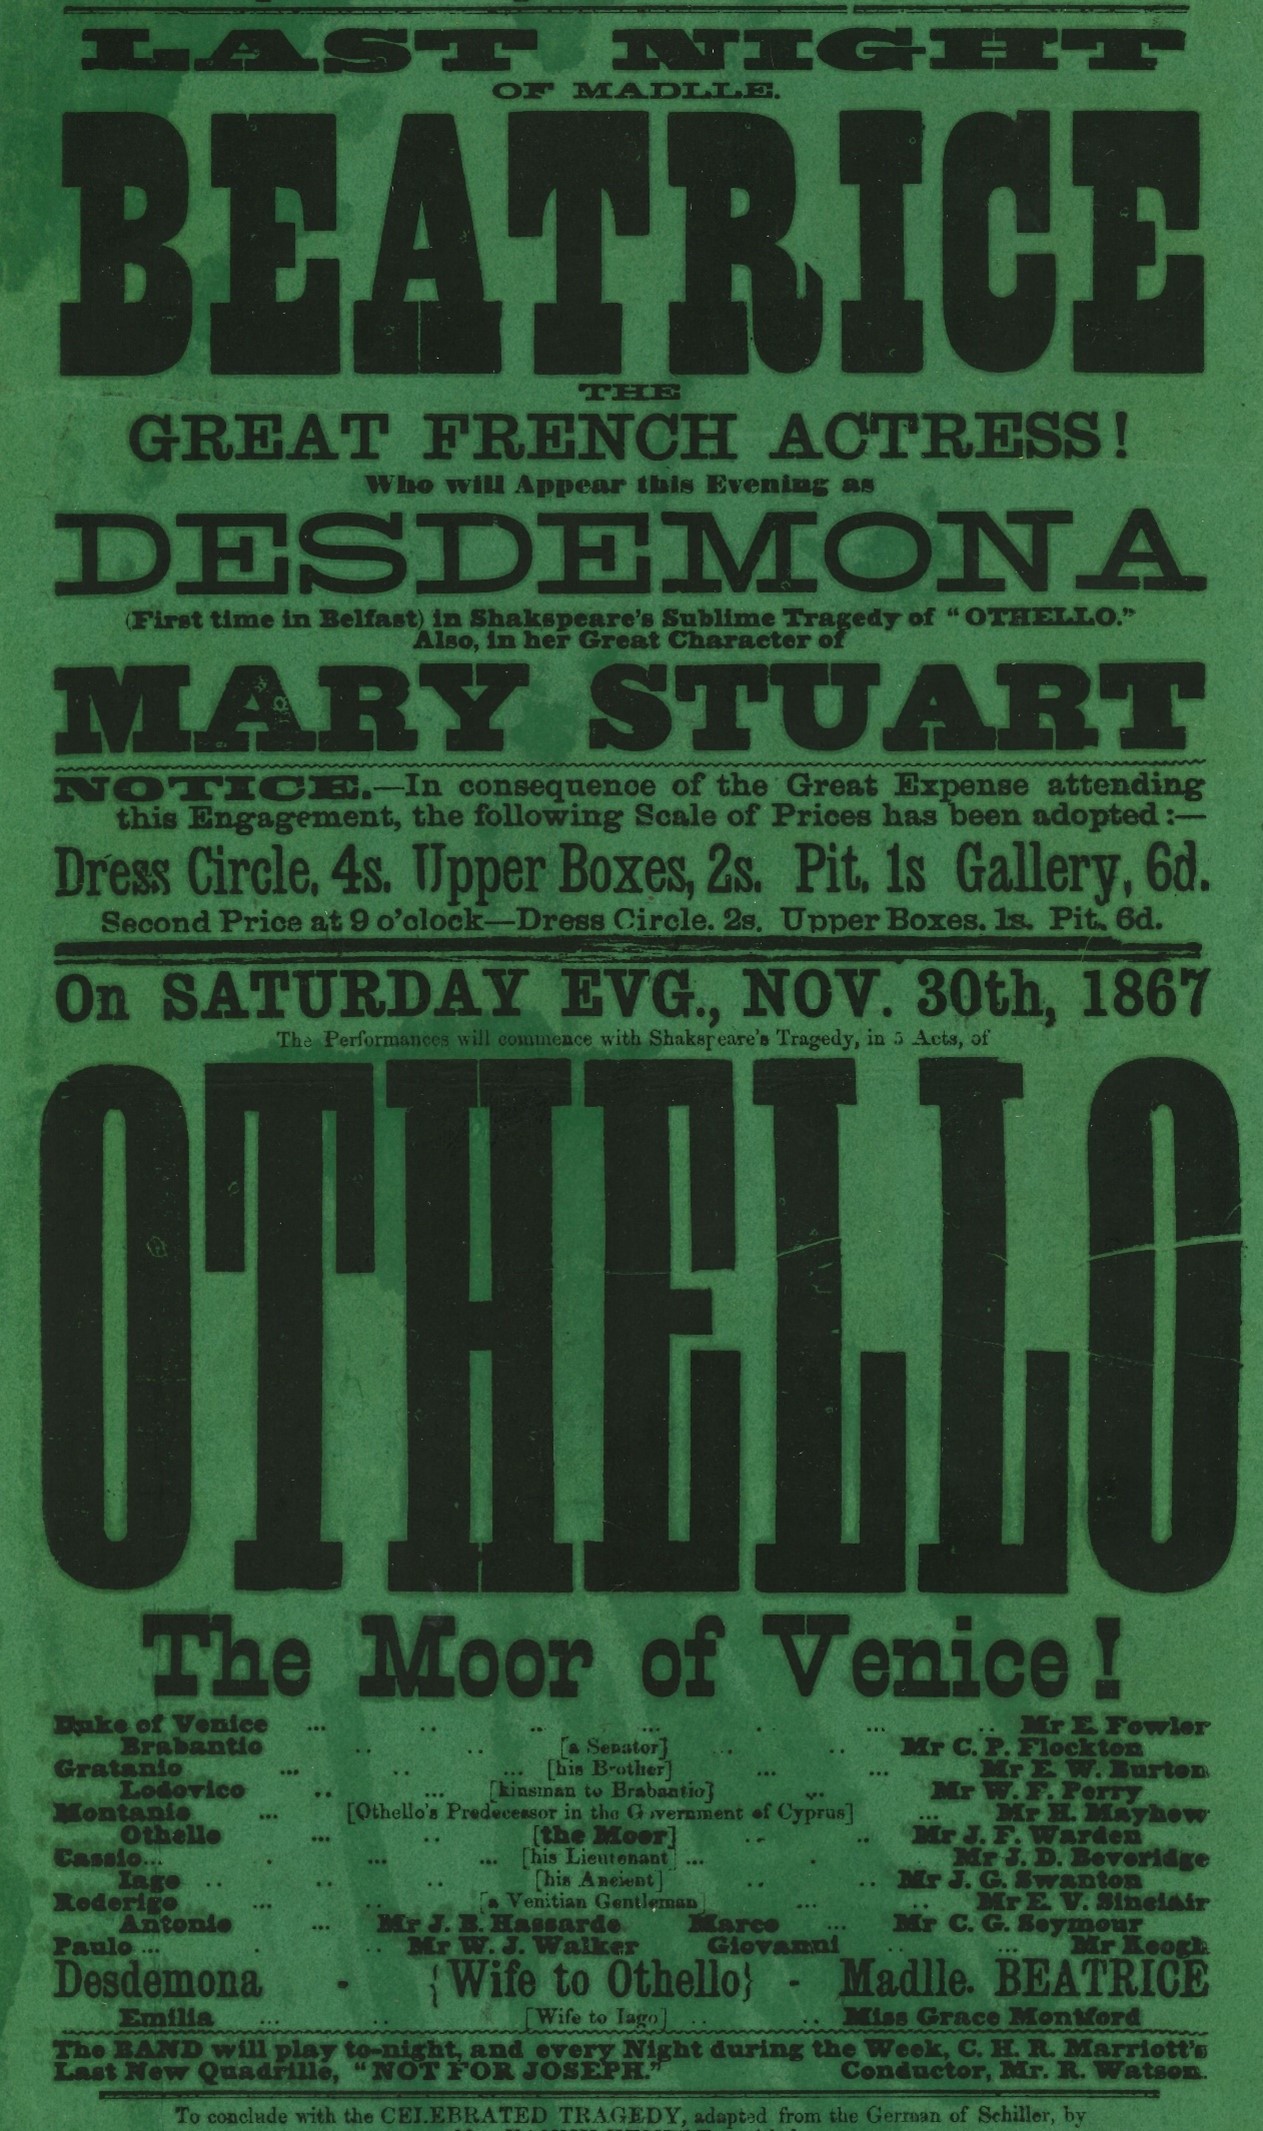 A poster in 1867 Mademoiselle Beatrice plays Desdemona opposite J F Warden as Othello